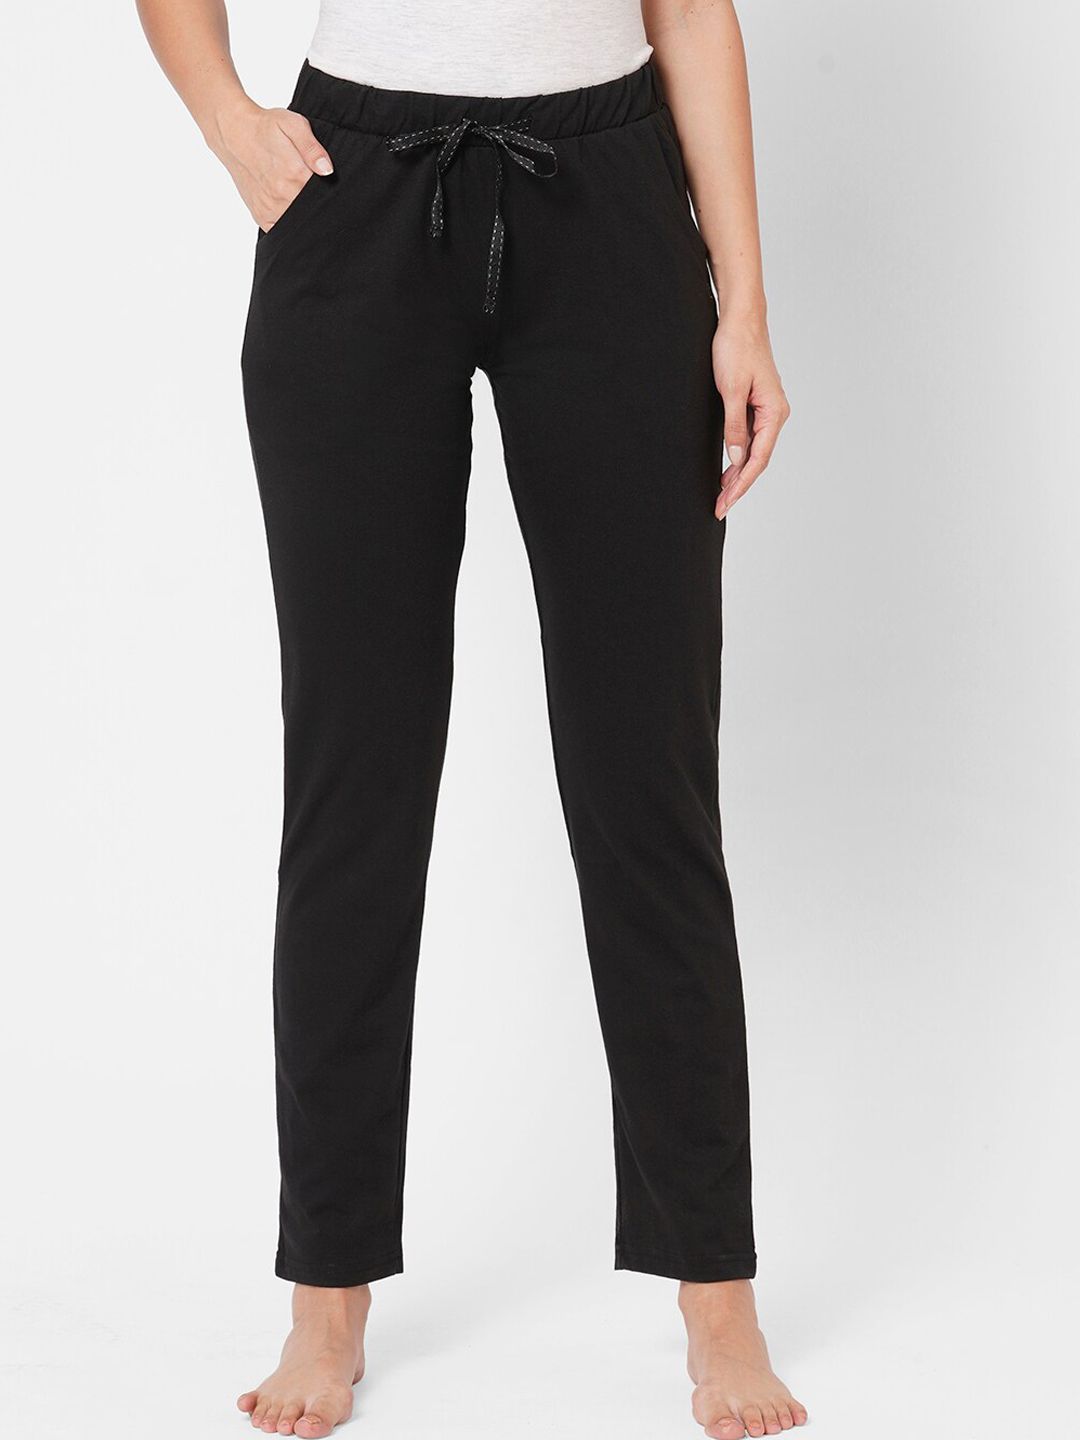 Sweet Dreams Women Black Solid Cotton Lounge Pants Price in India